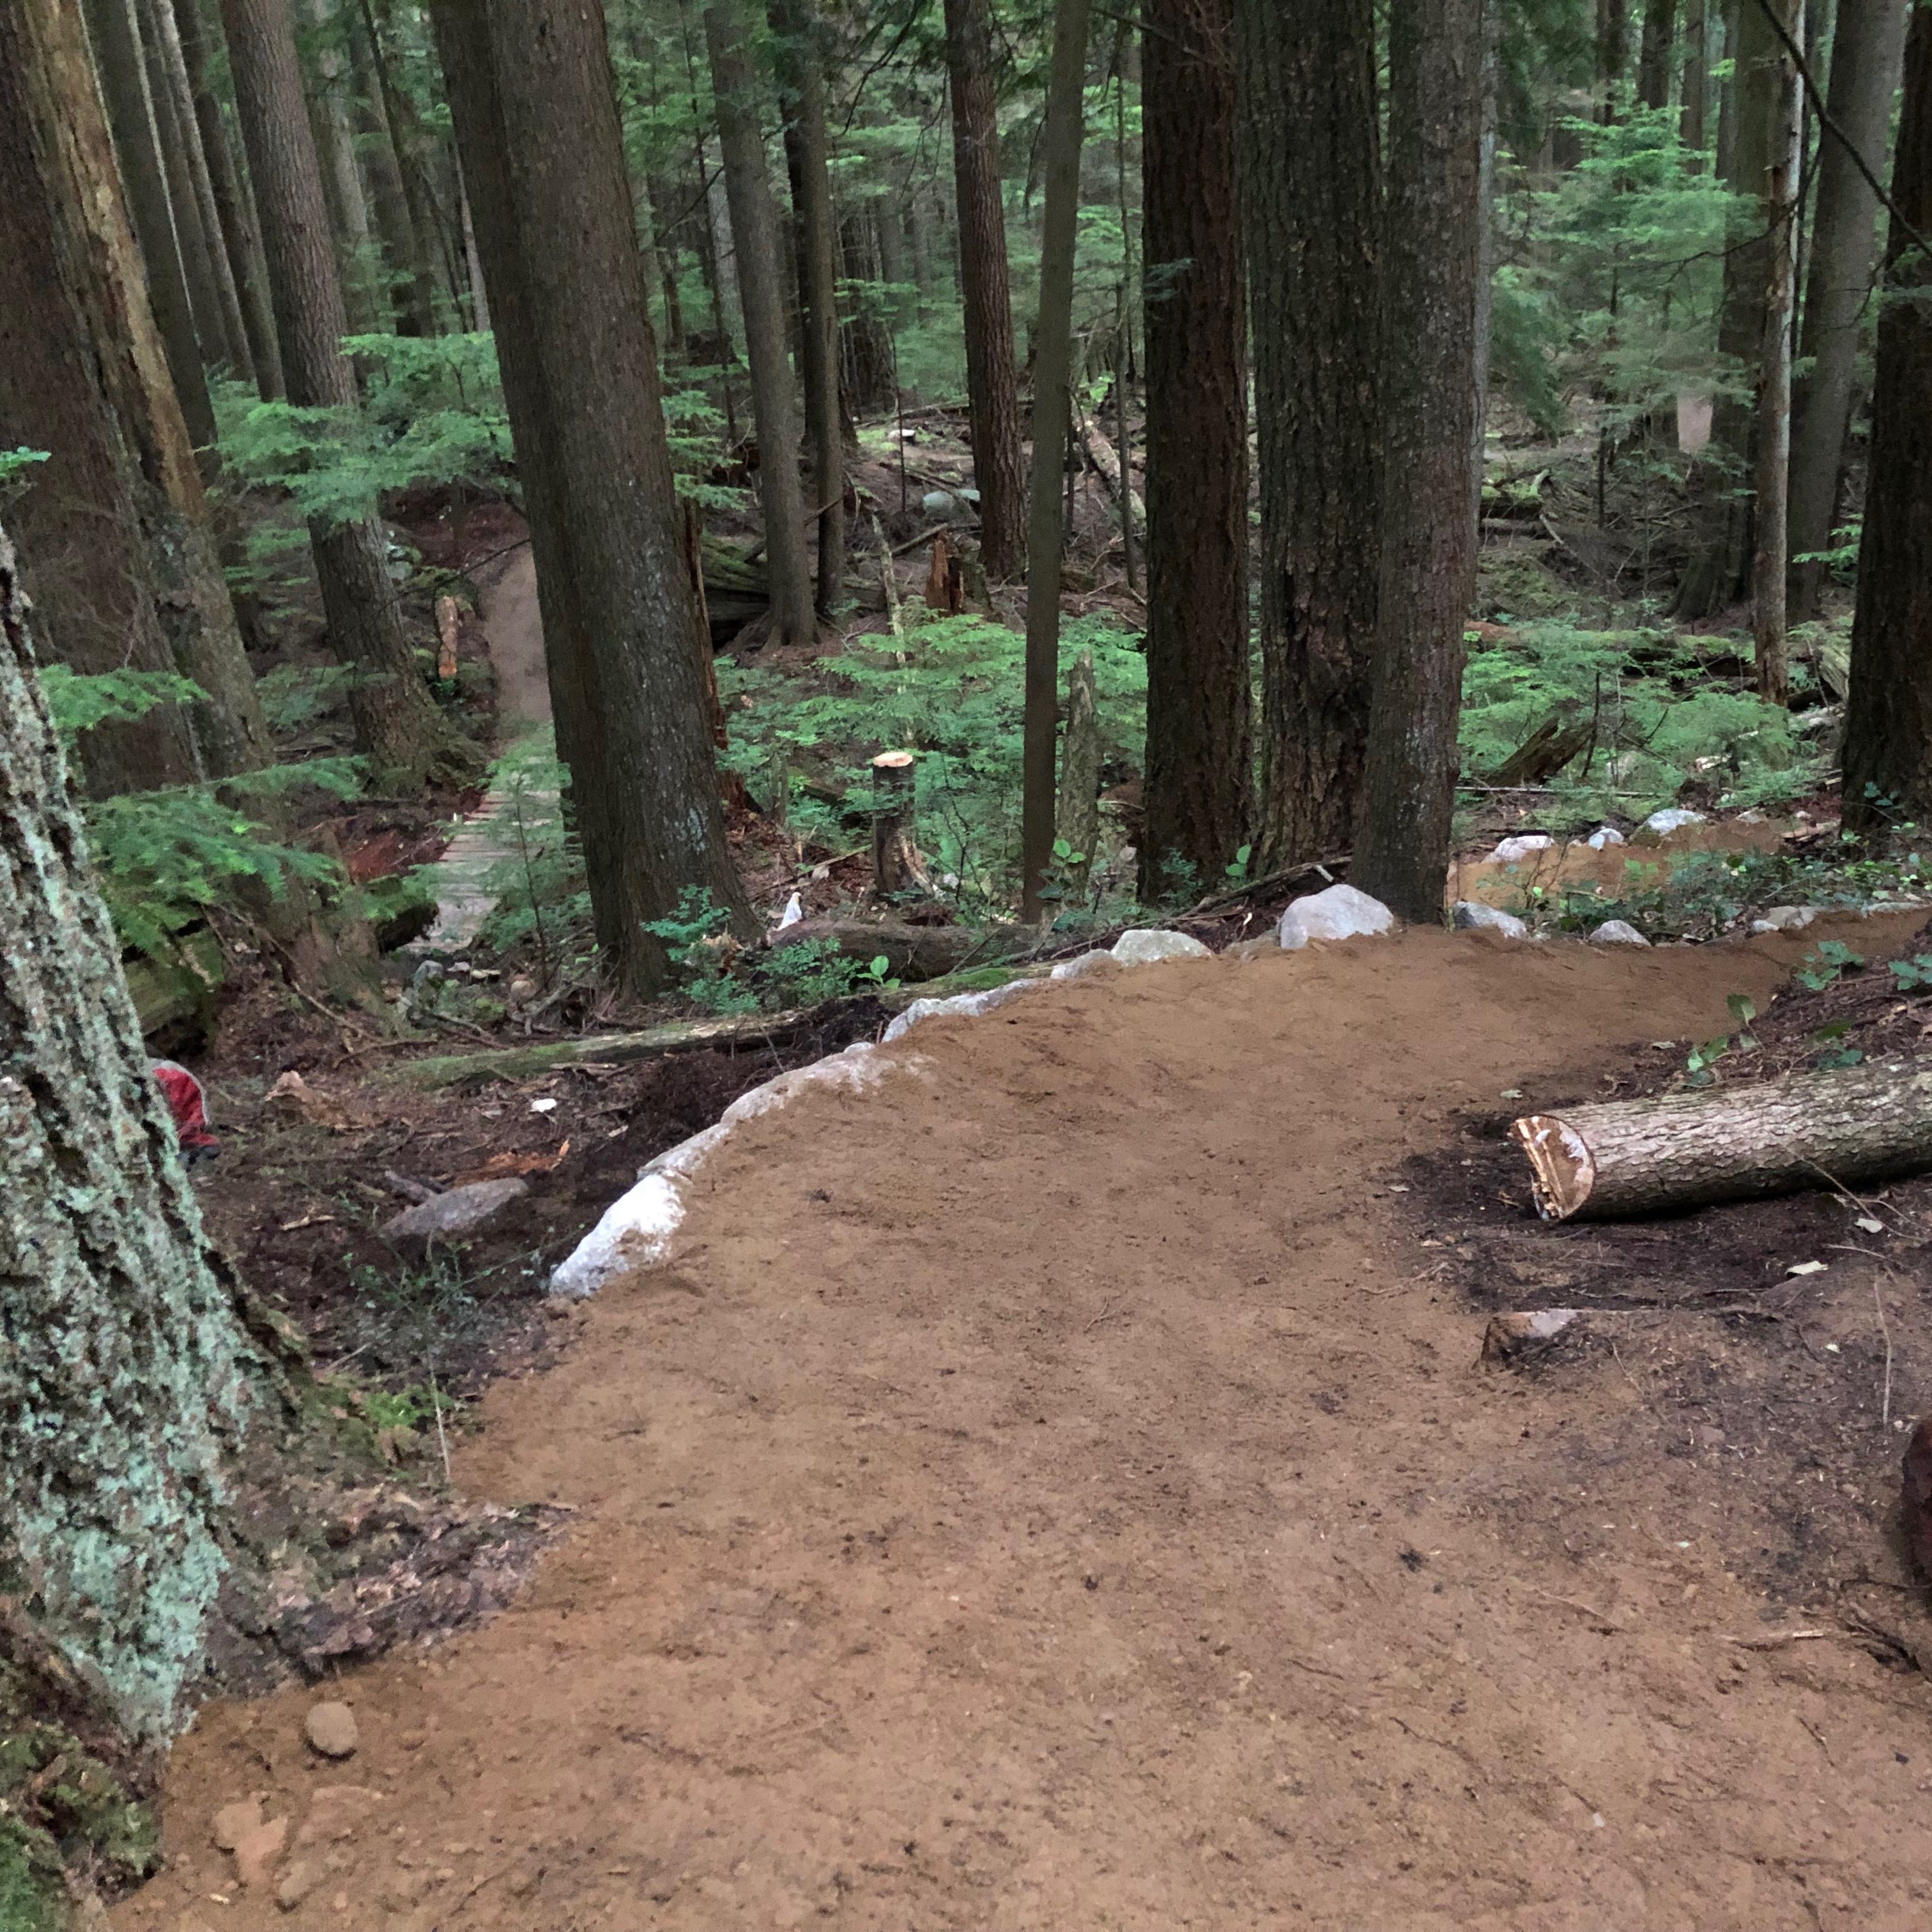 A freshly built section of trail with an inviting berm